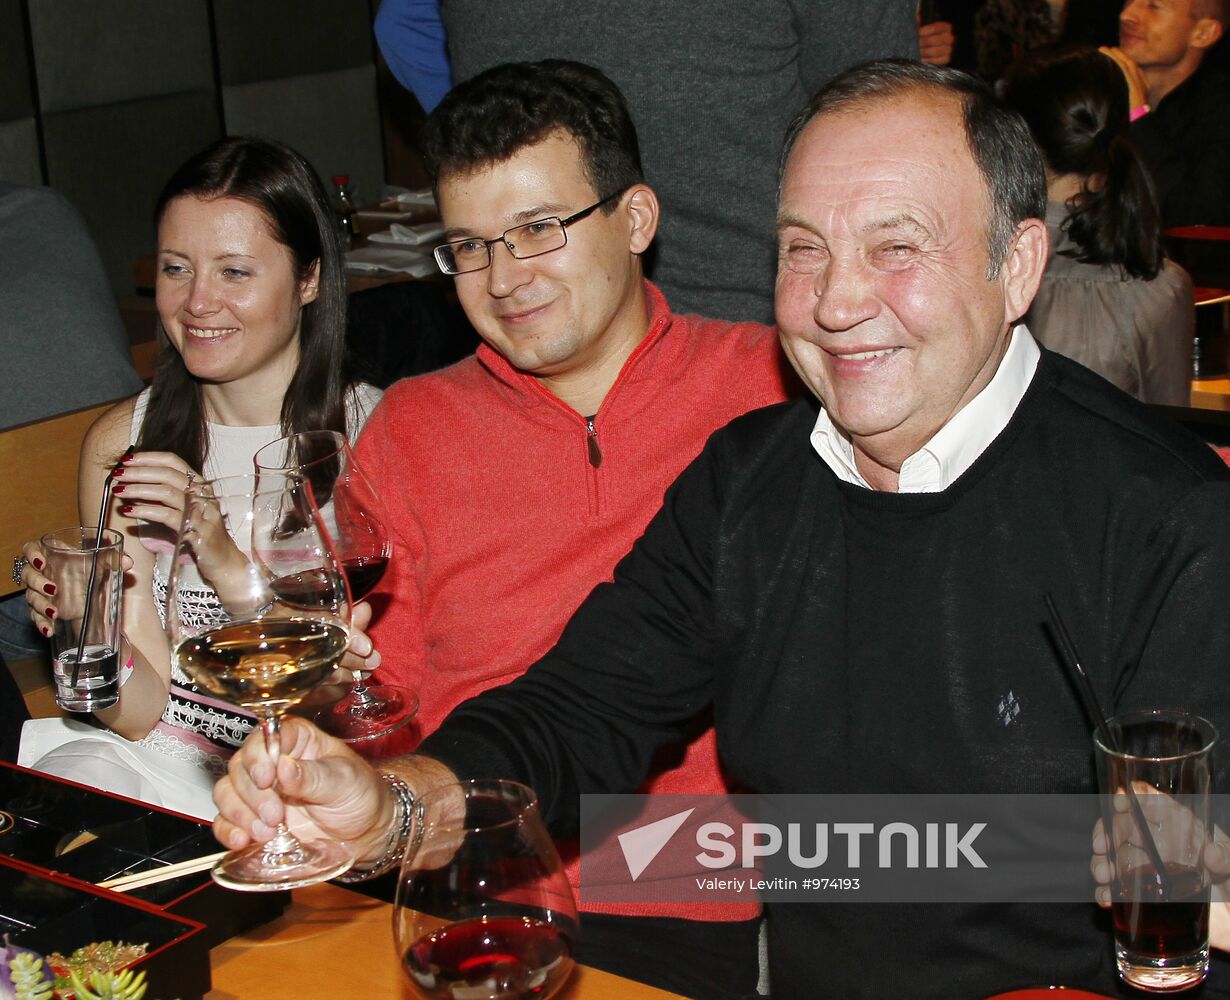 Official party of Kremlin Cup and Crocus City Group players